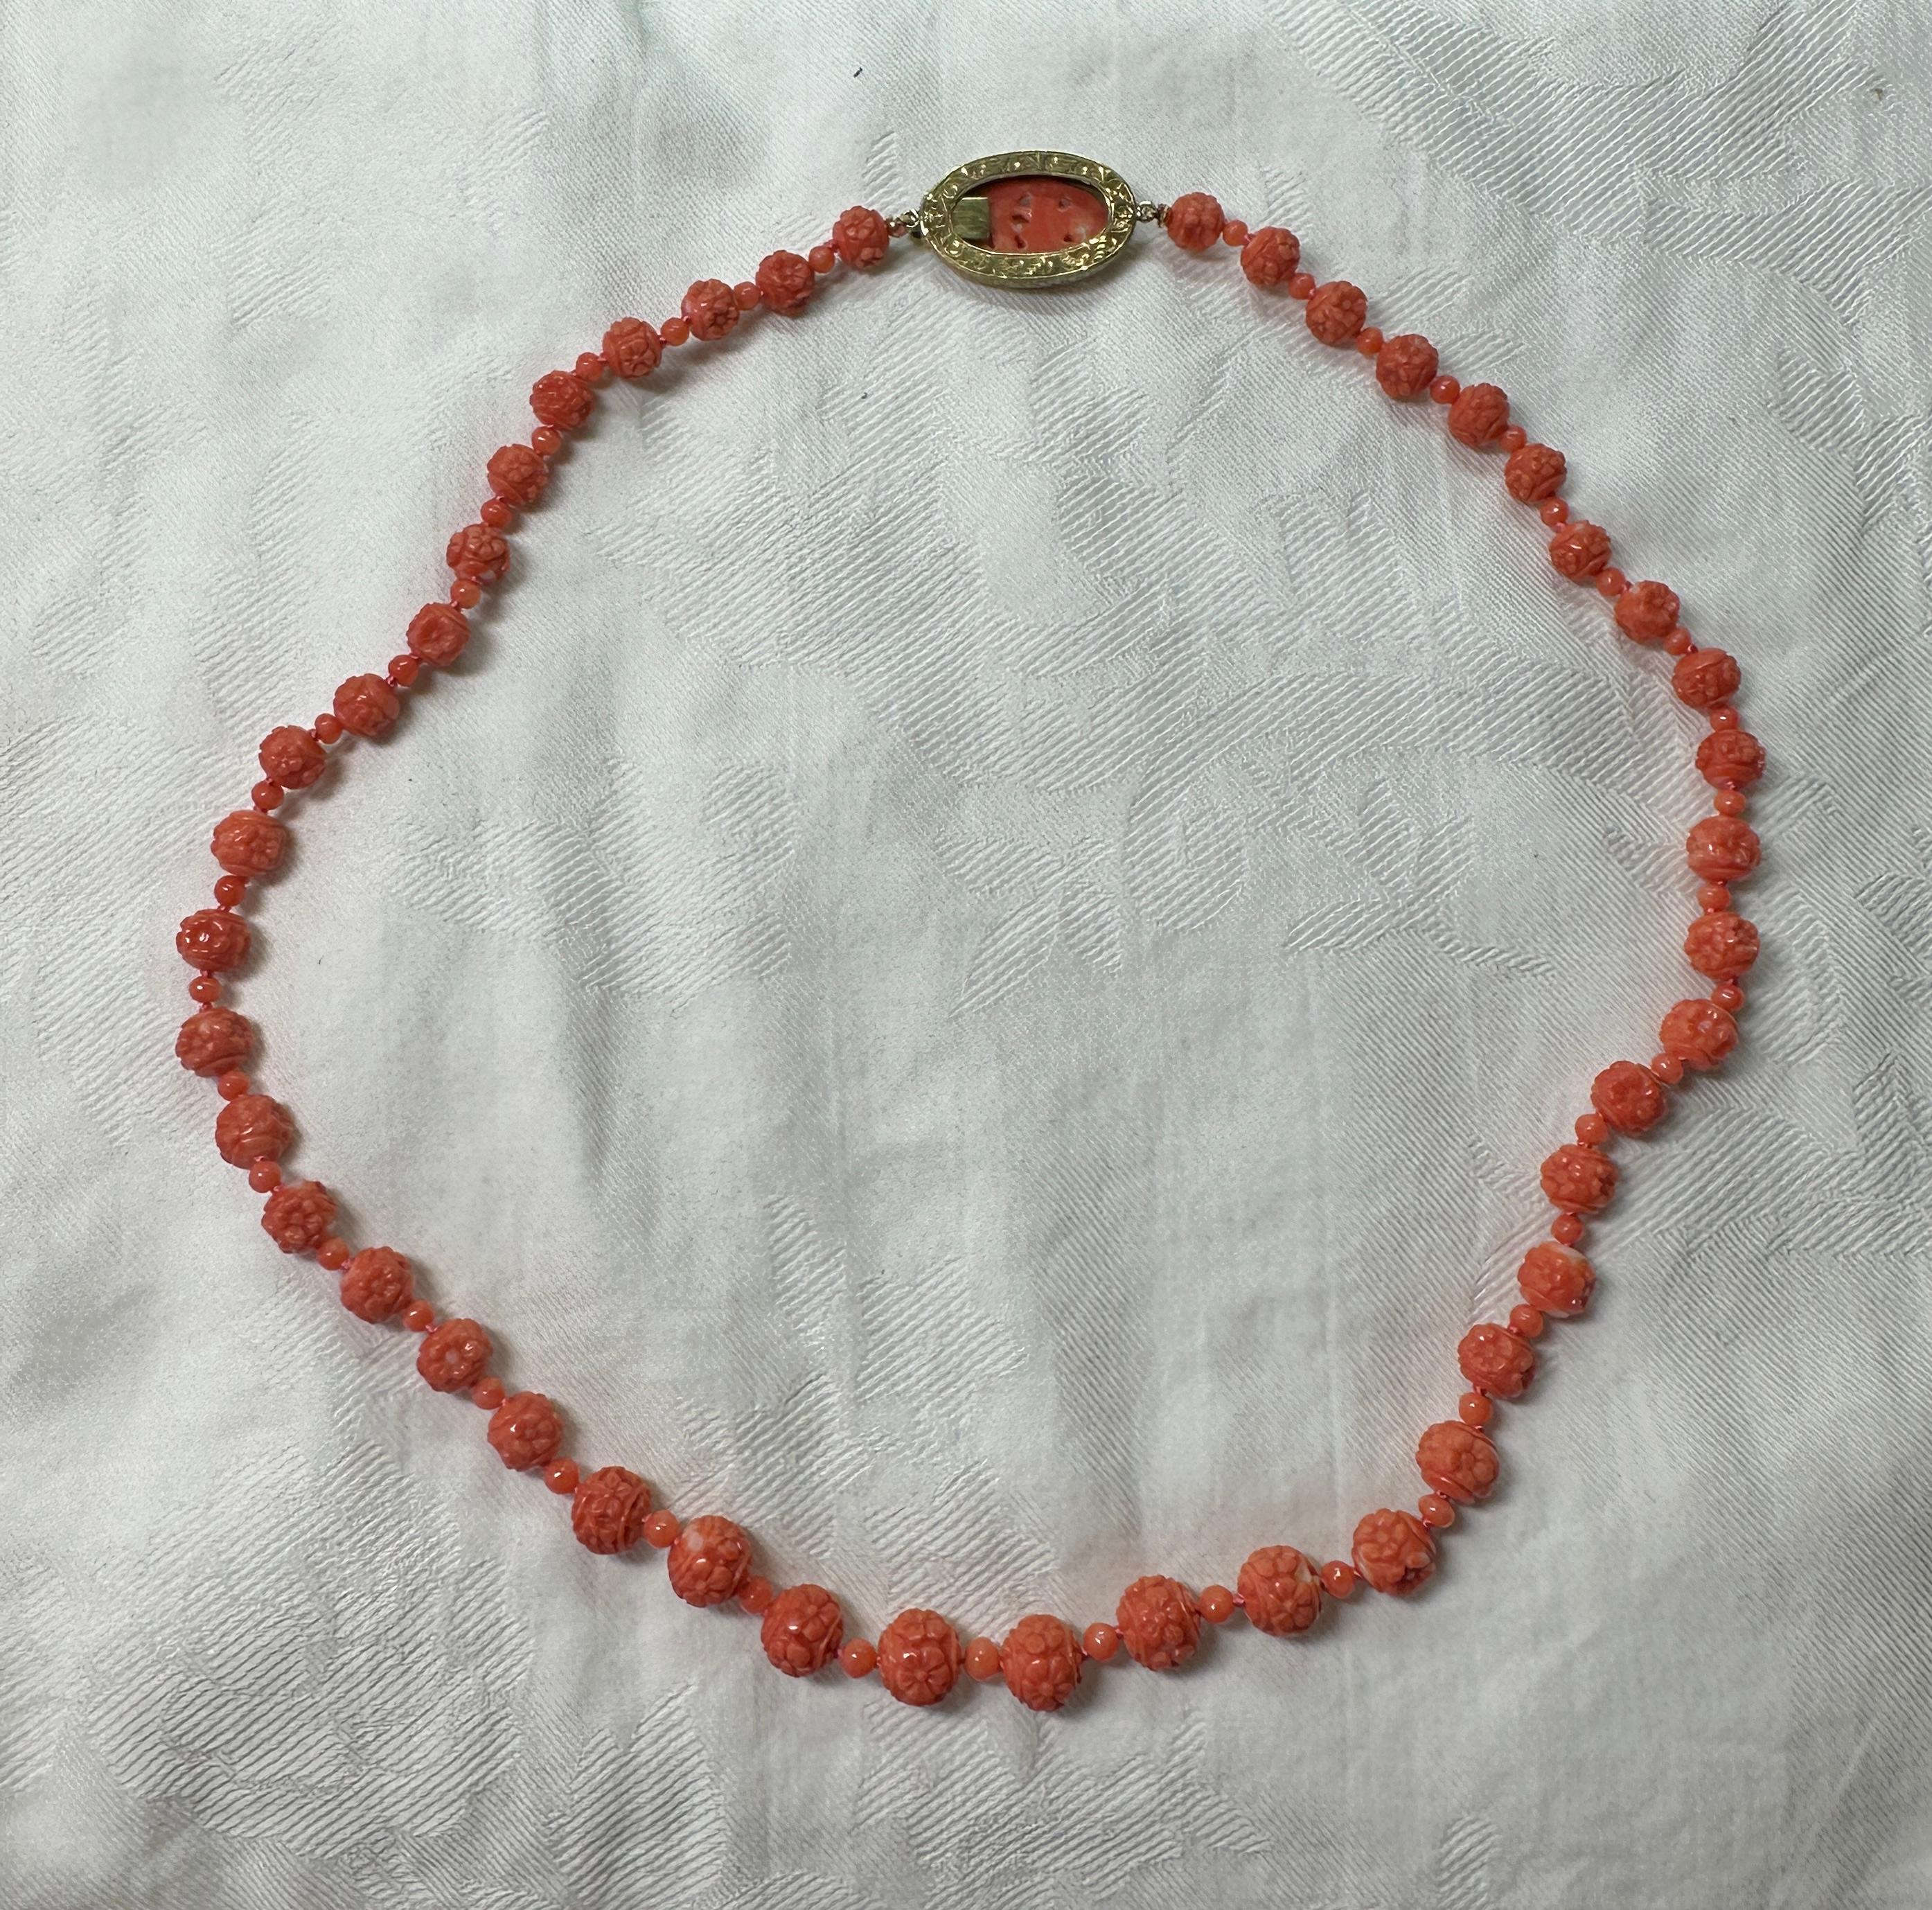 Victorian Coral Flower Necklace 18 Karat Gold Hand Carved Coral Beads and Clasp For Sale 5